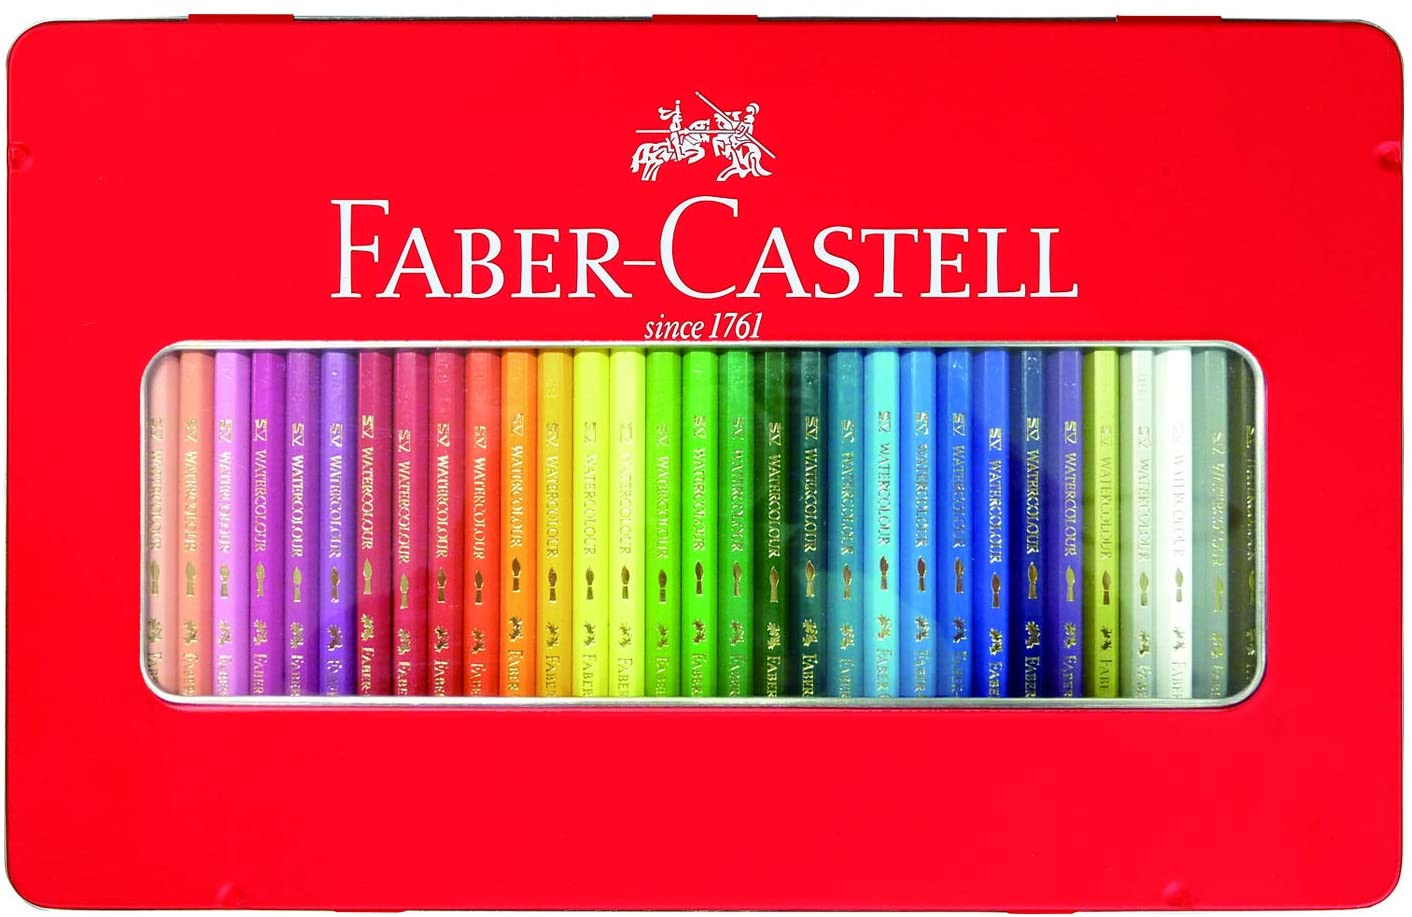 Shachihata] [Mail] Faber-Castell watercolor colored pencils 36 colors